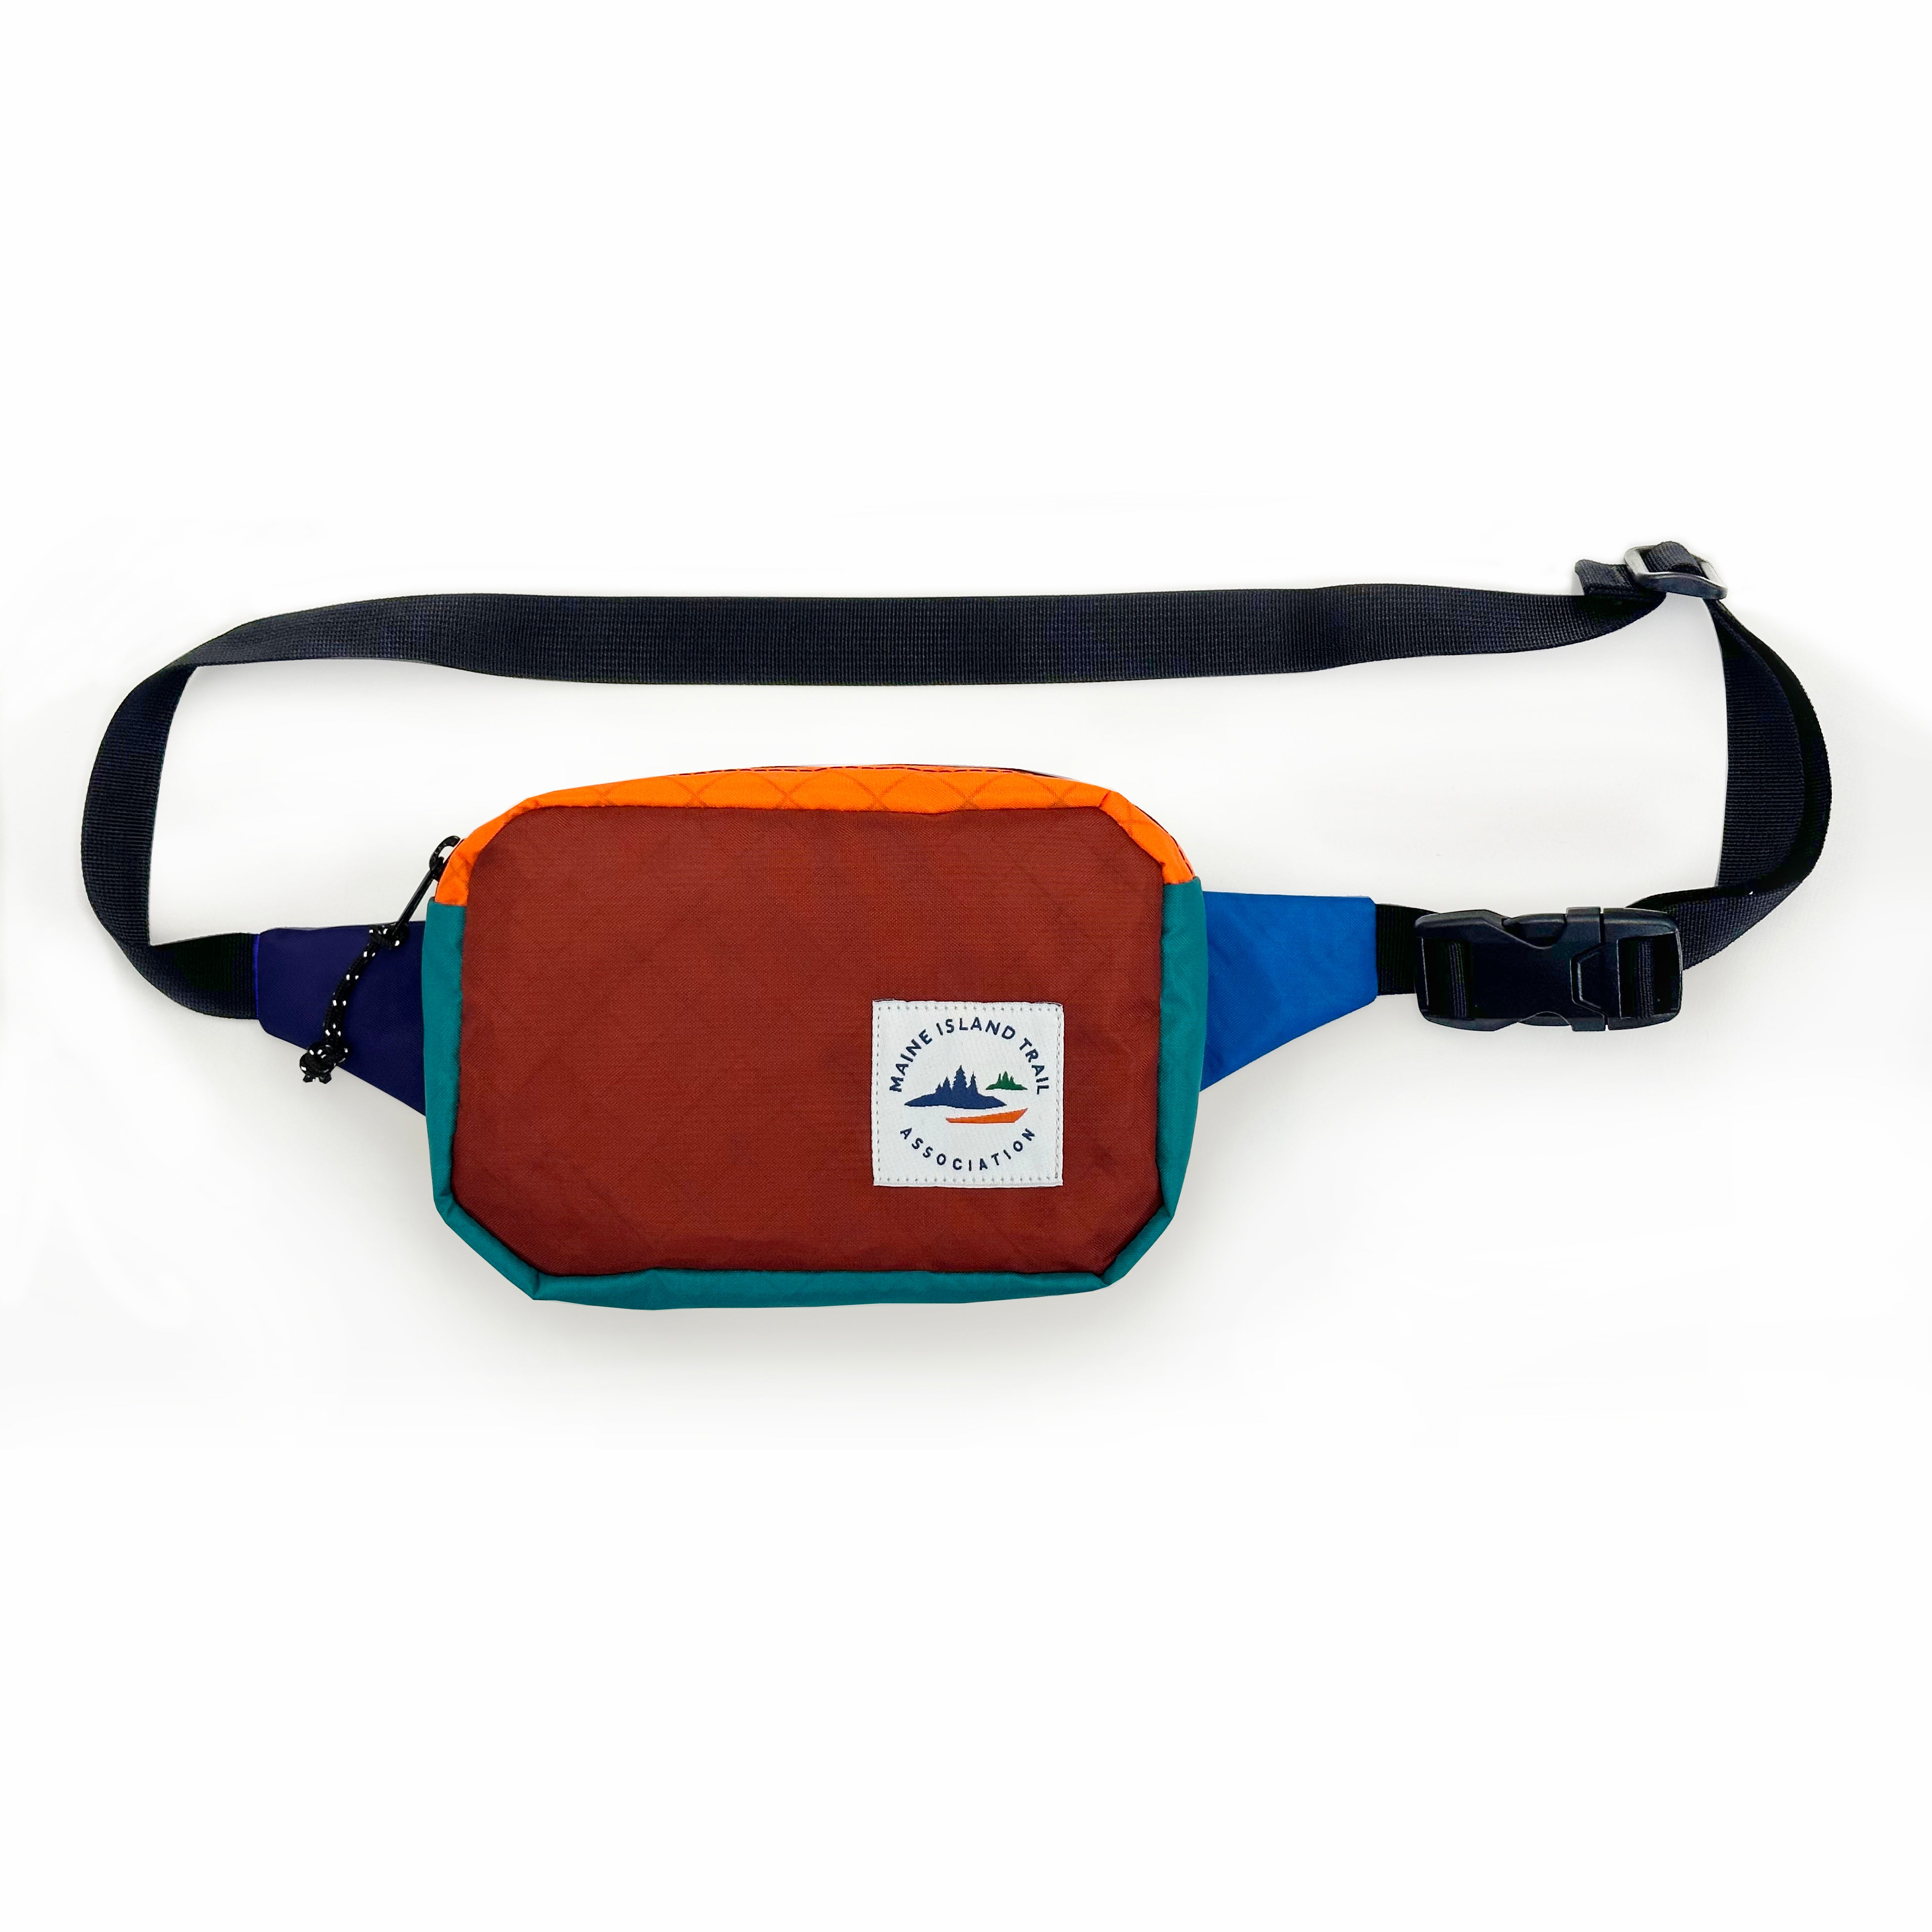 Durable and weather-resistant MITA x Flowfold Explorer Fanny Pack - Recycled Brick Red Color Block